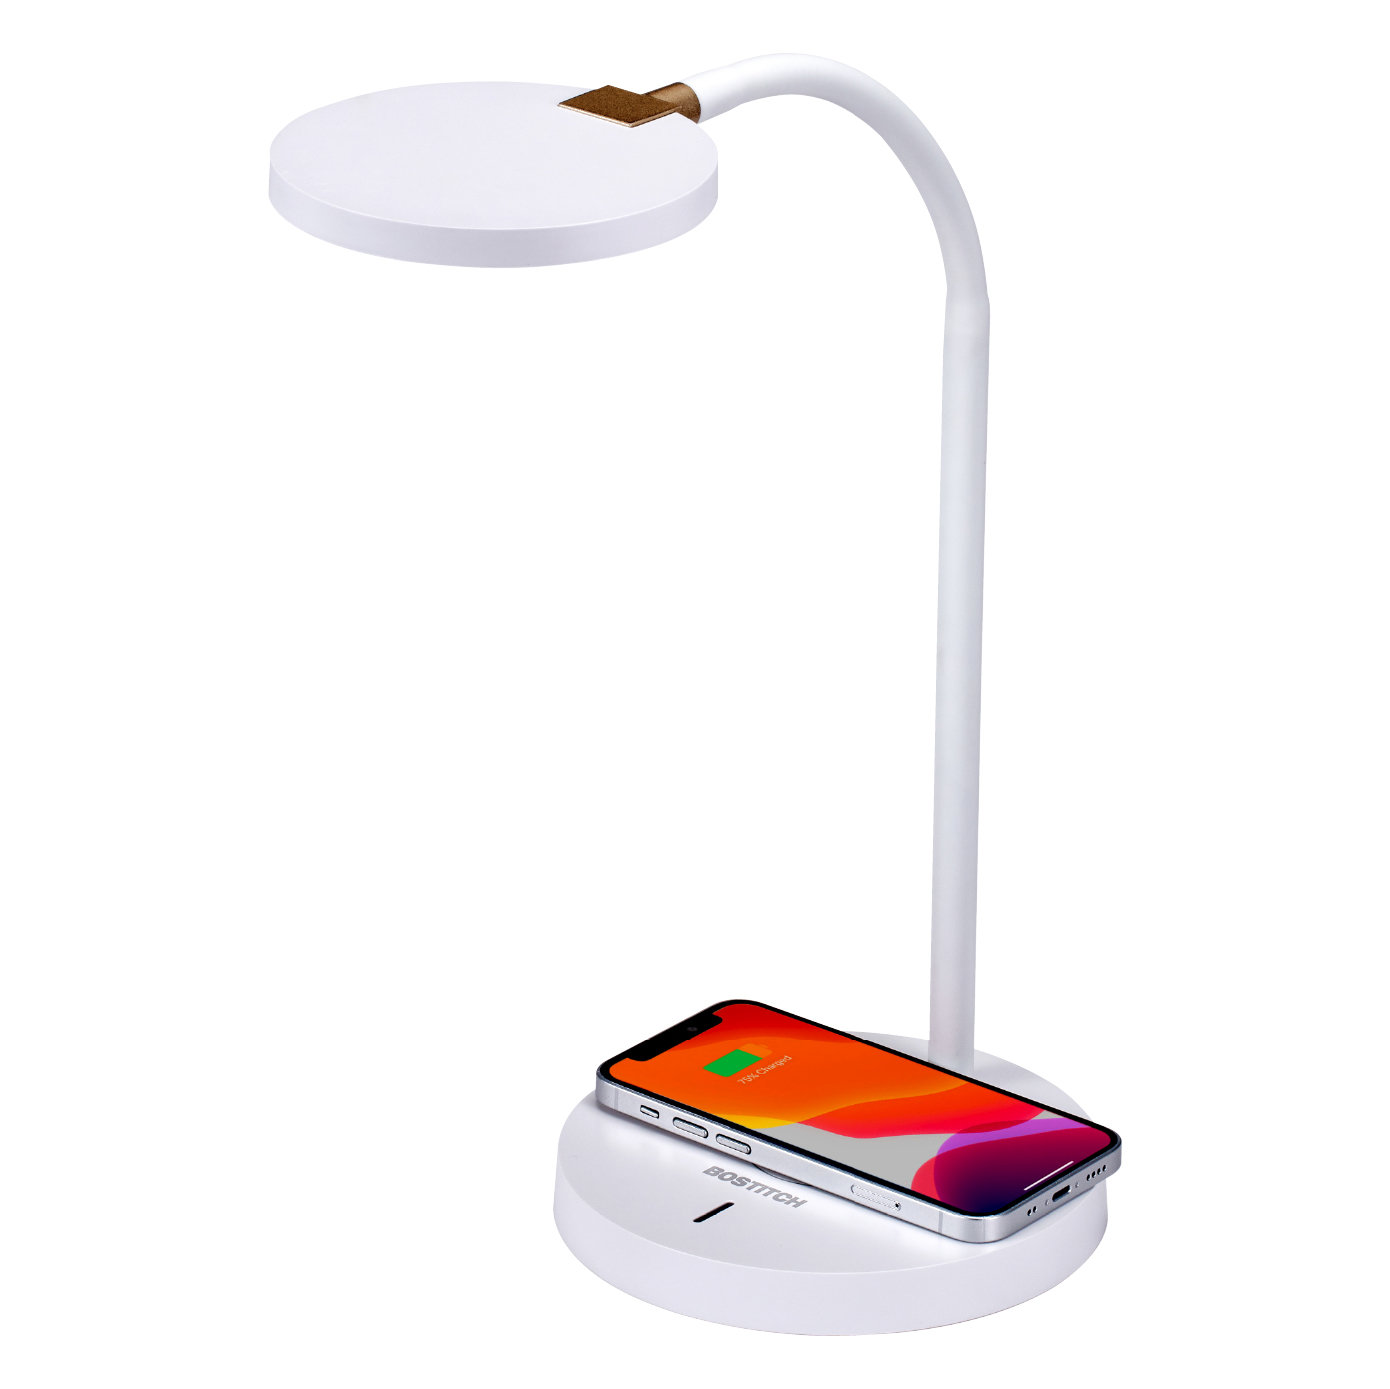 OttLite Charge Up LED Desk Lamp with Wireless Charging & ClearSun LED  Technology - 3 Color Temperature Modes, Adjustable Neck -Task Lamp for  Home